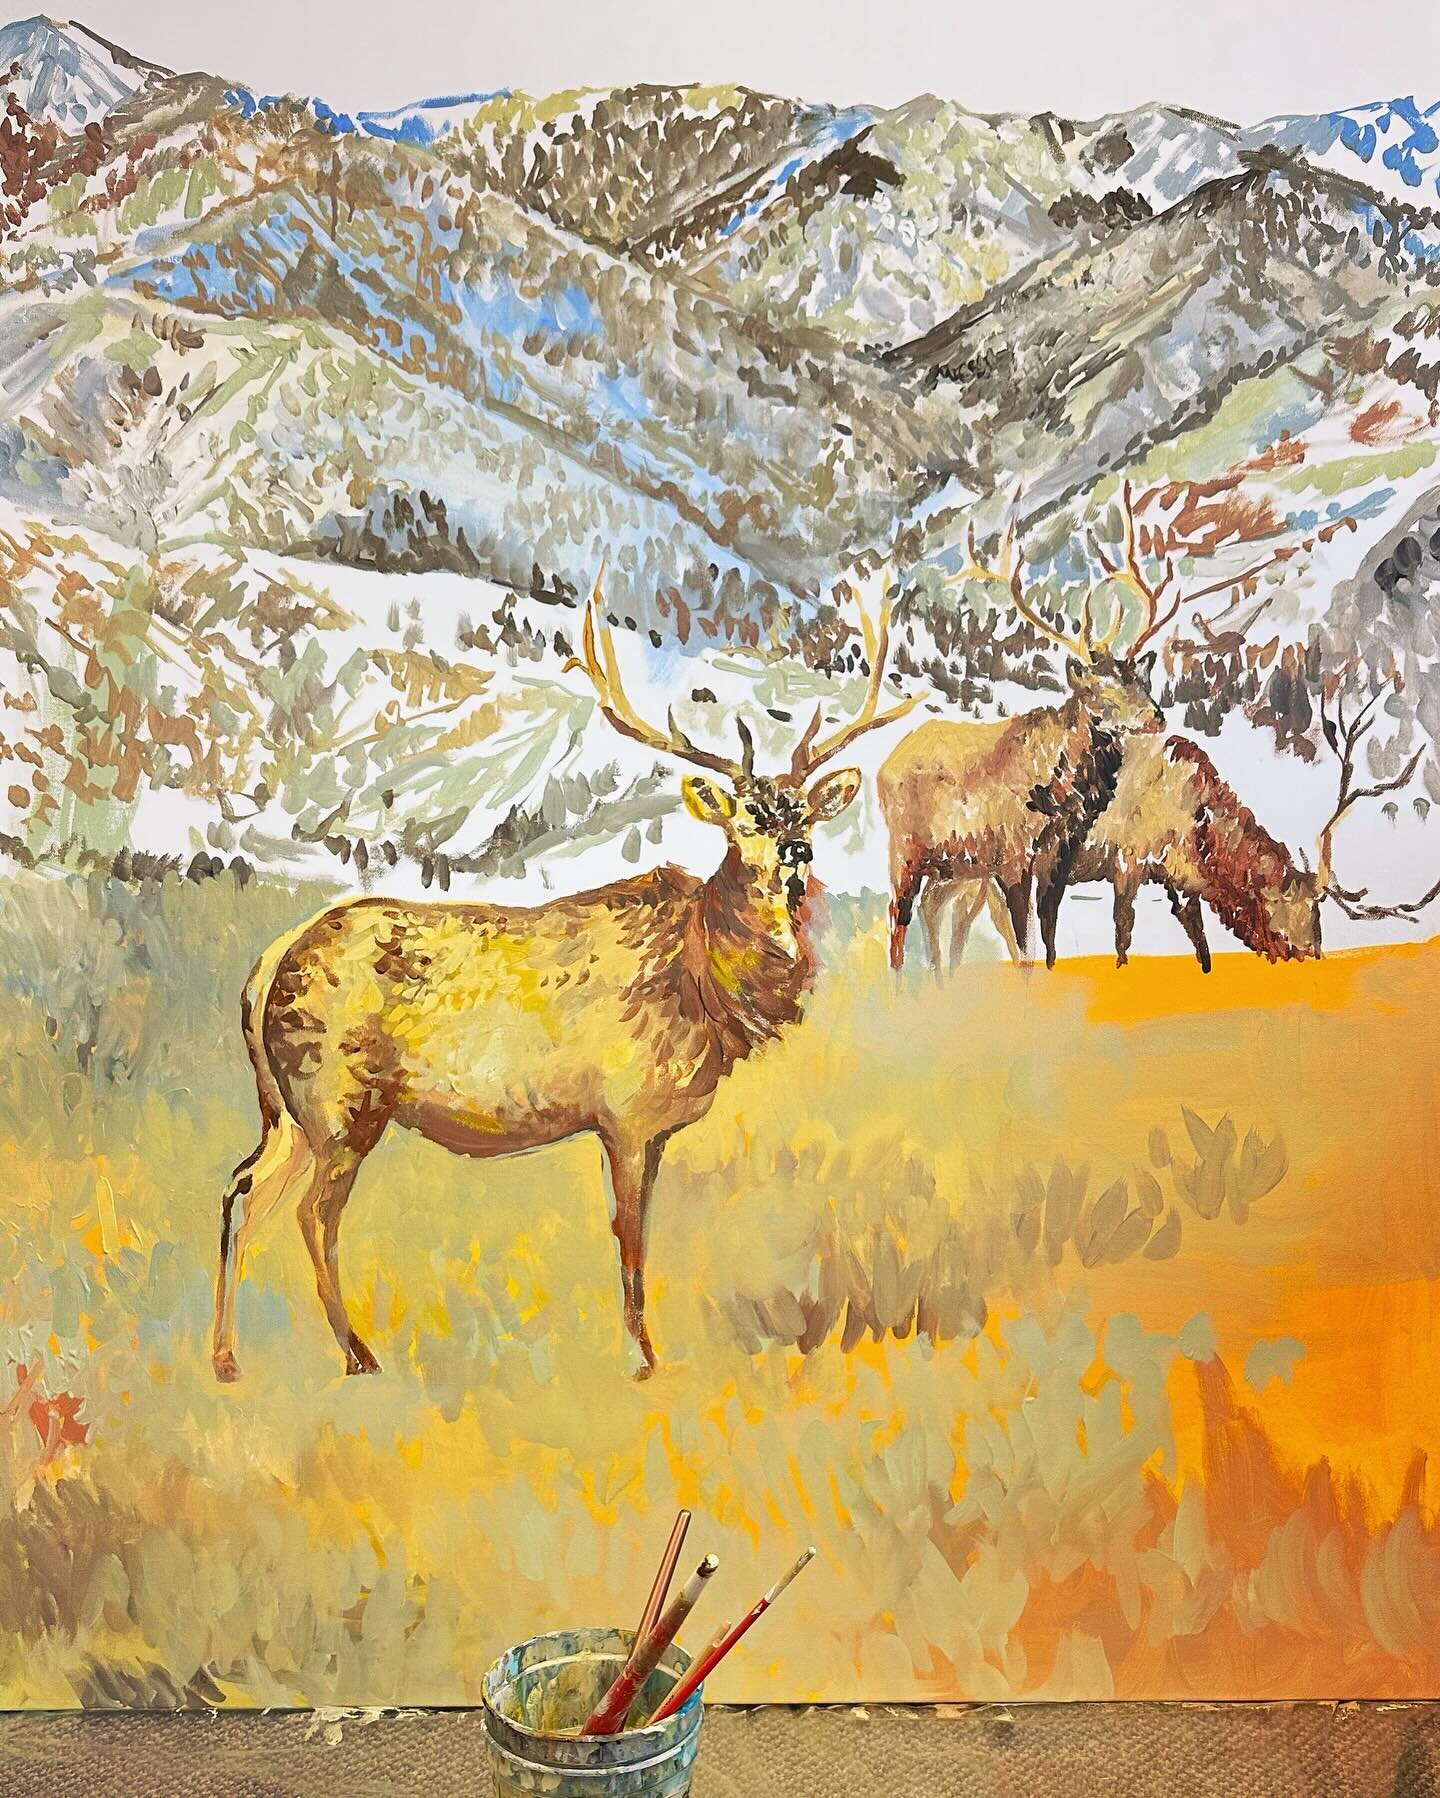 The underpainting beginning to fold into the over painting. Progress on a commission 🦌 

And I&rsquo;m thrilled to say this view is now beautifully blanketed in snow!

#landscapepainting #landscapepainter #westernpainting #westernlandscape #elk #sun